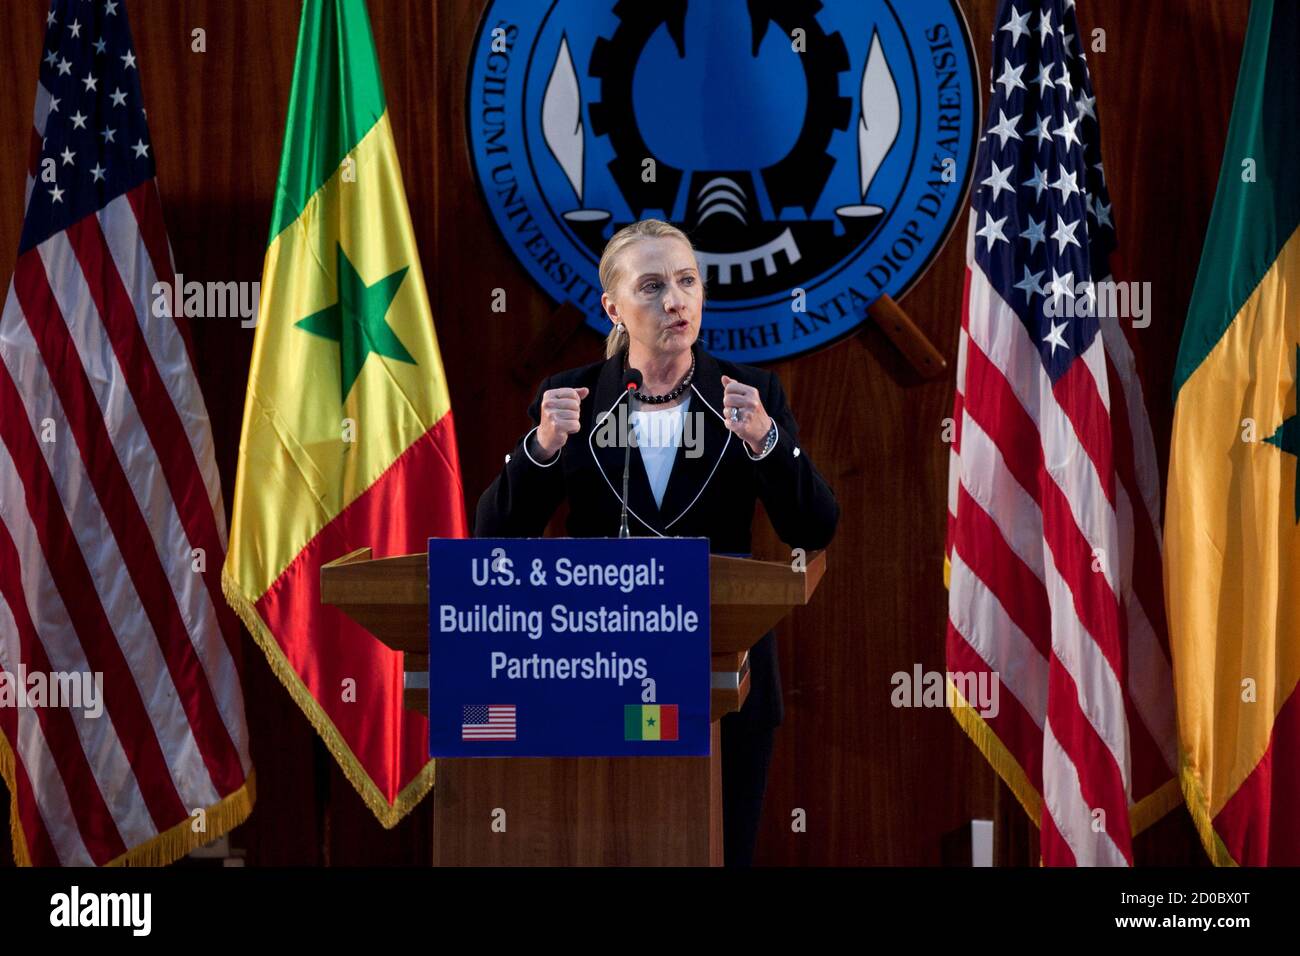 U.S. Secretary of State Hillary Clinton speaks at the University of Dakar in Senegal, August 1, 2012. Clinton urged Africa on Wednesday to recommit to democracy, declaring the 'old ways of governing' can no longer work on a continent boasting healthy economic growth and an increasingly empowered citizenry. REUTERS/Joe Penney (SENEGAL - Tags: POLITICS) Stock Photo